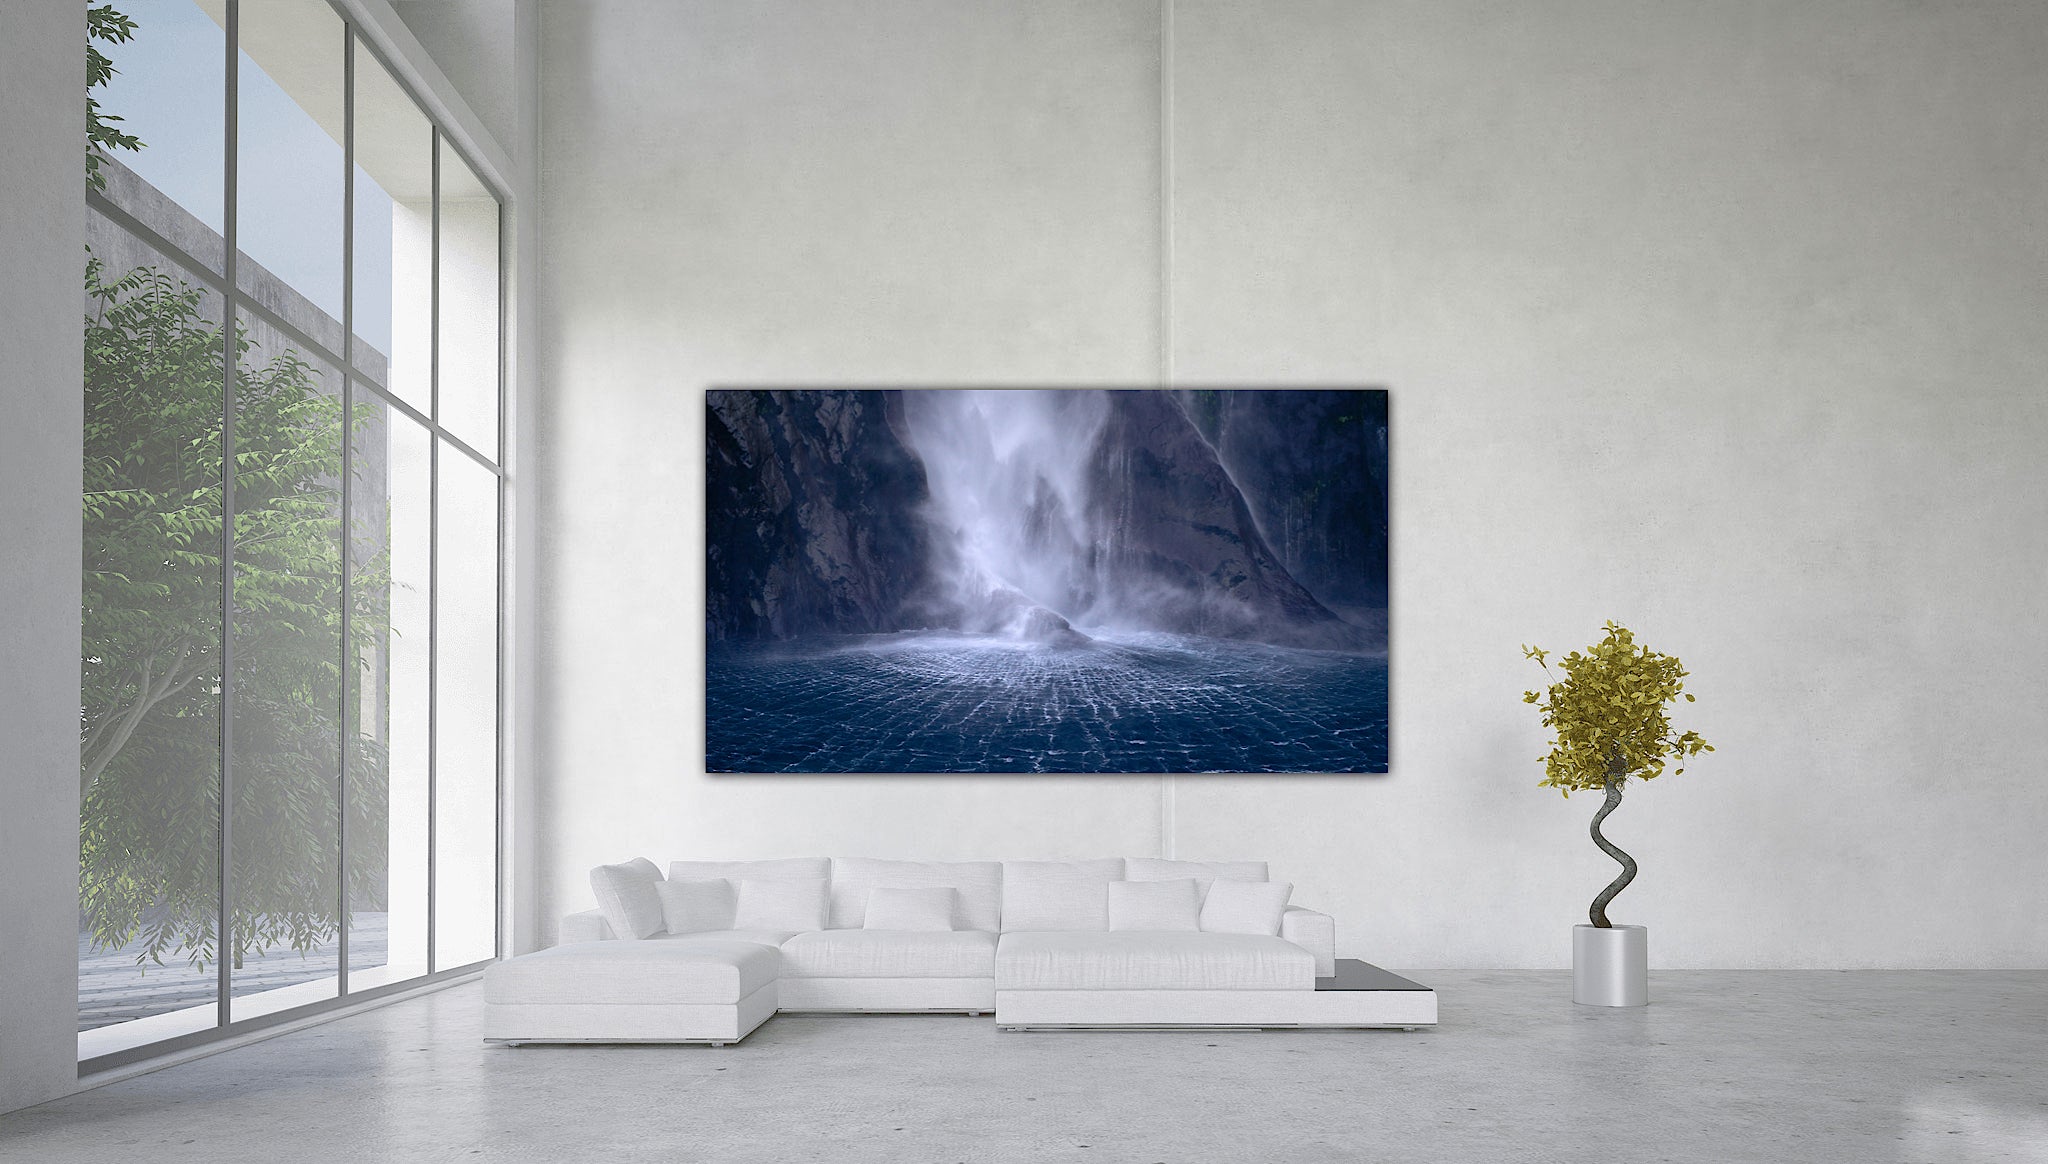 Connecting with Nature- The Power of Landscape Photography in Interior Decor by  New Zealand Award Winning Landscape Photographer Stephen Milner